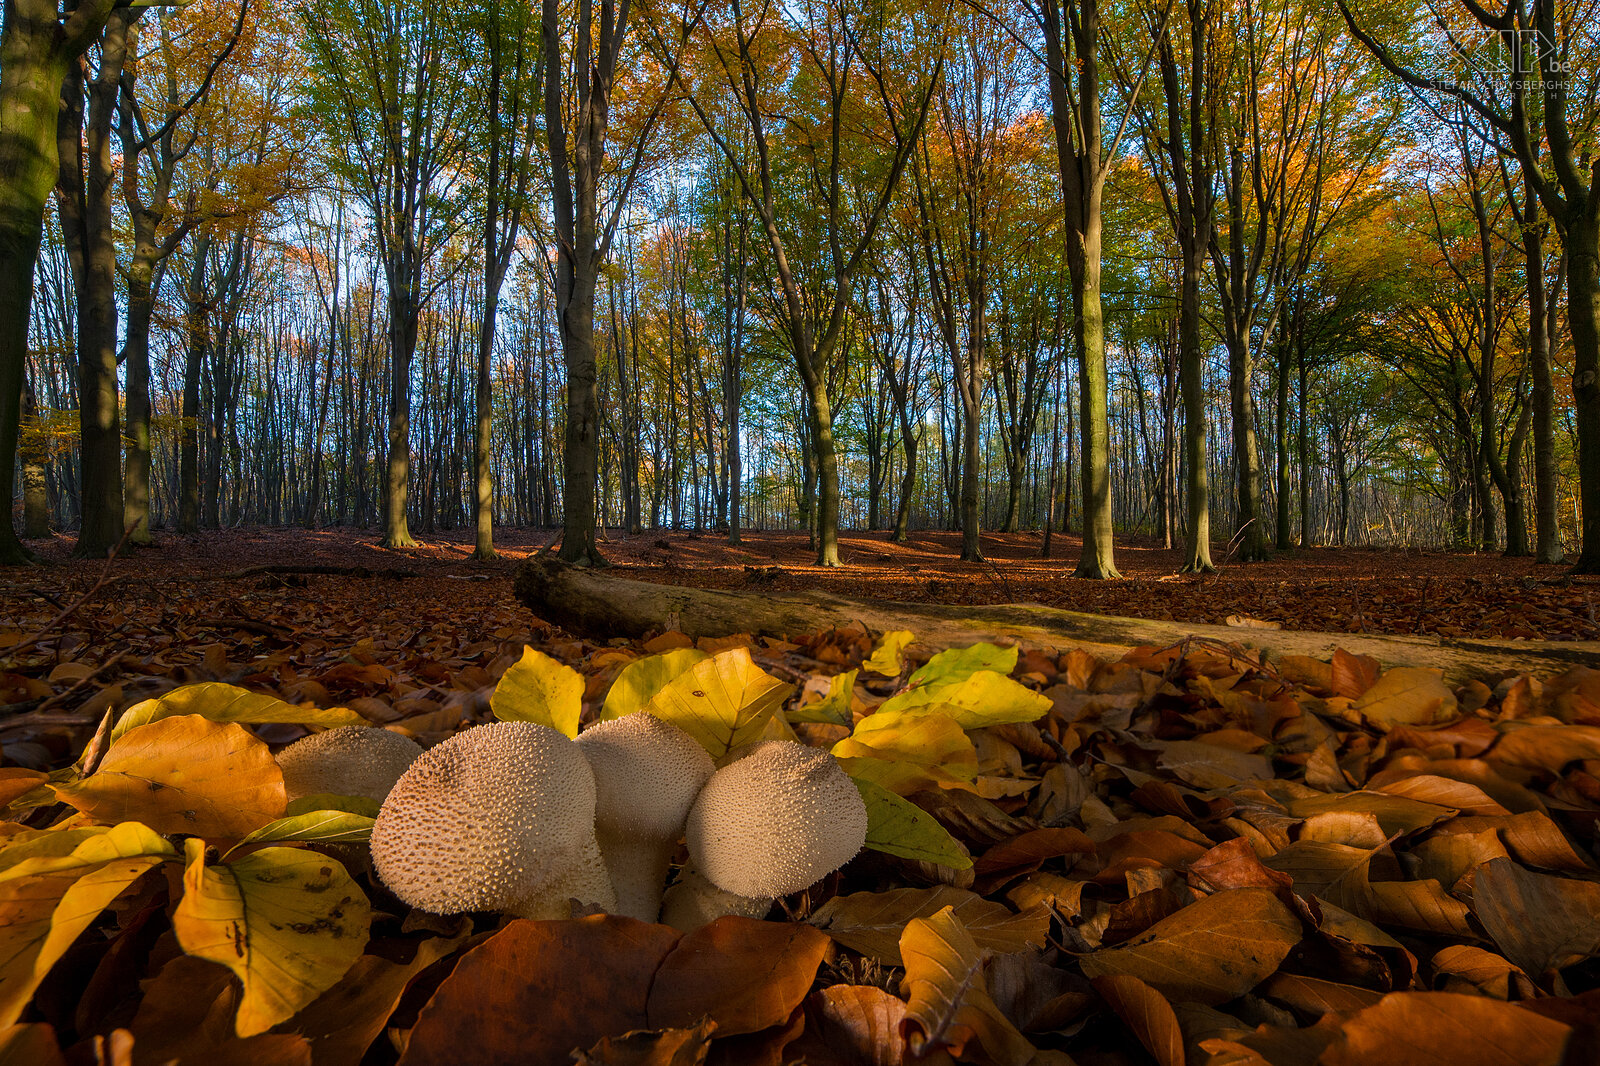 Autumn Autumn is one of the most beautiful seasons in nature. Hereby a small varied series of autumn photos of mushrooms and beautiful colors of trees in Scherpenheuvel and Holsbeek. Stefan Cruysberghs